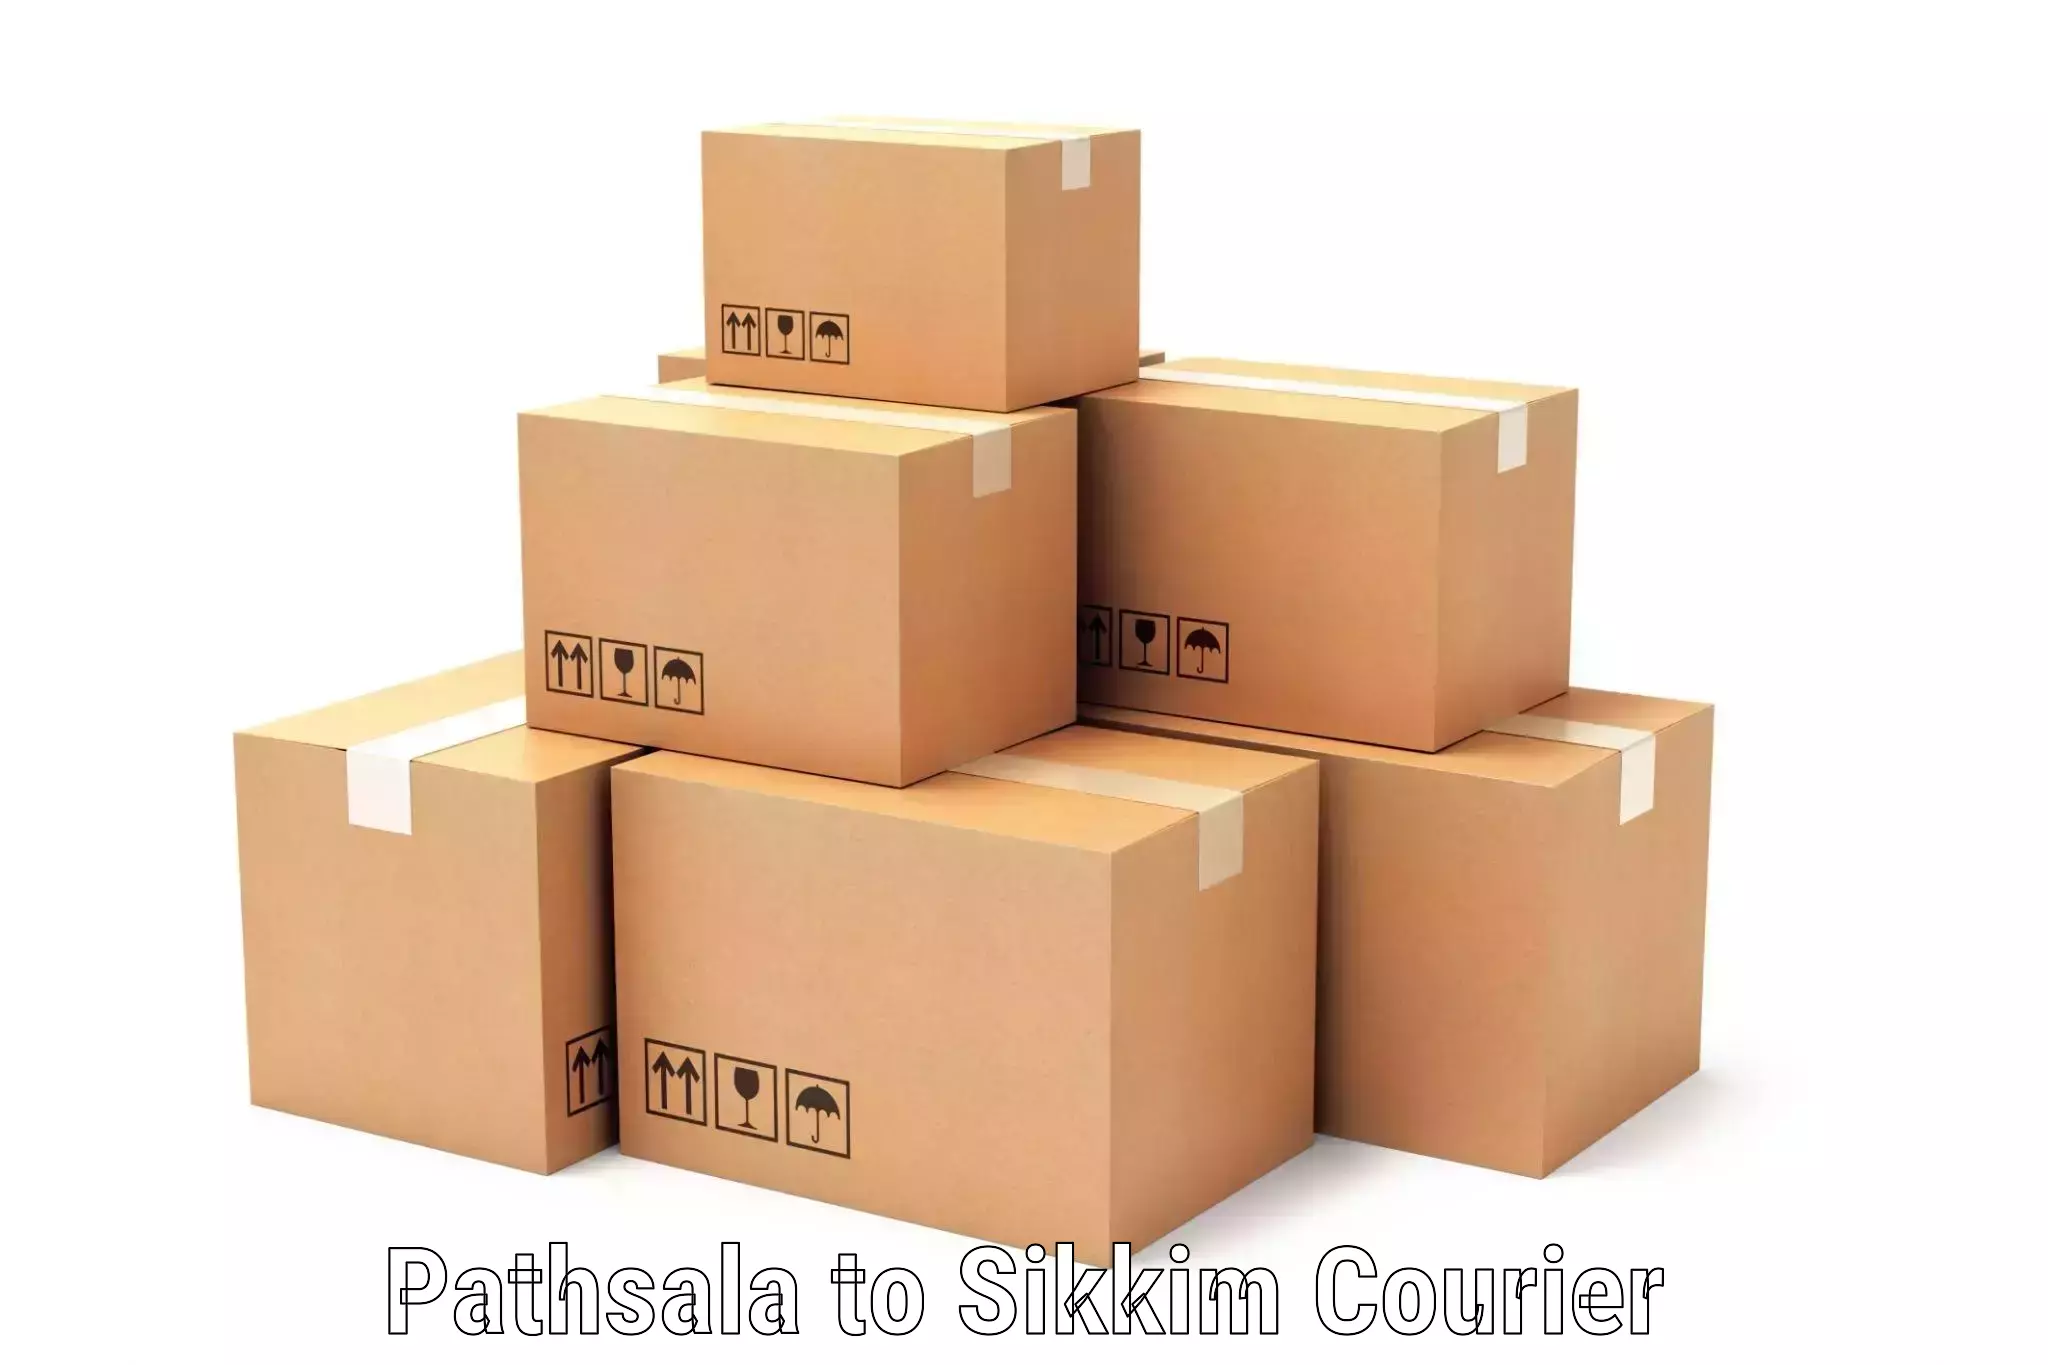 Seamless shipping experience Pathsala to Sikkim